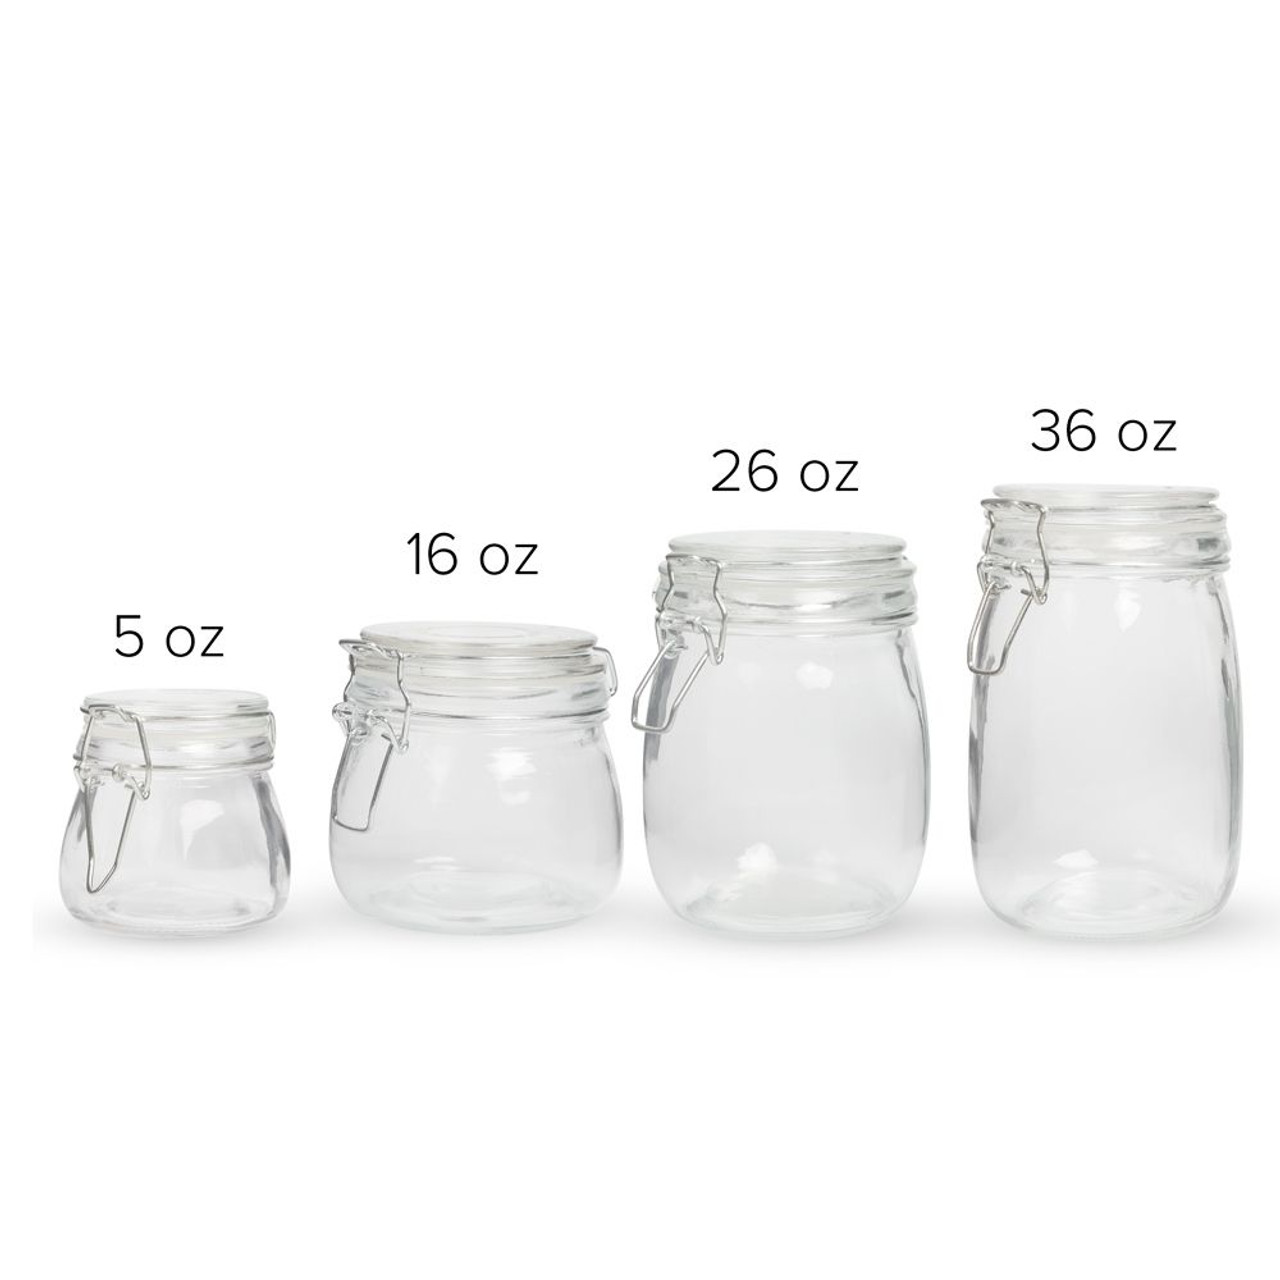 https://cdn11.bigcommerce.com/s-cznxq08r7/images/stencil/1280x1280/products/3829/6922/hmjxx-hinged-apothecary-jars-12__72389.1590770812.jpg?c=1